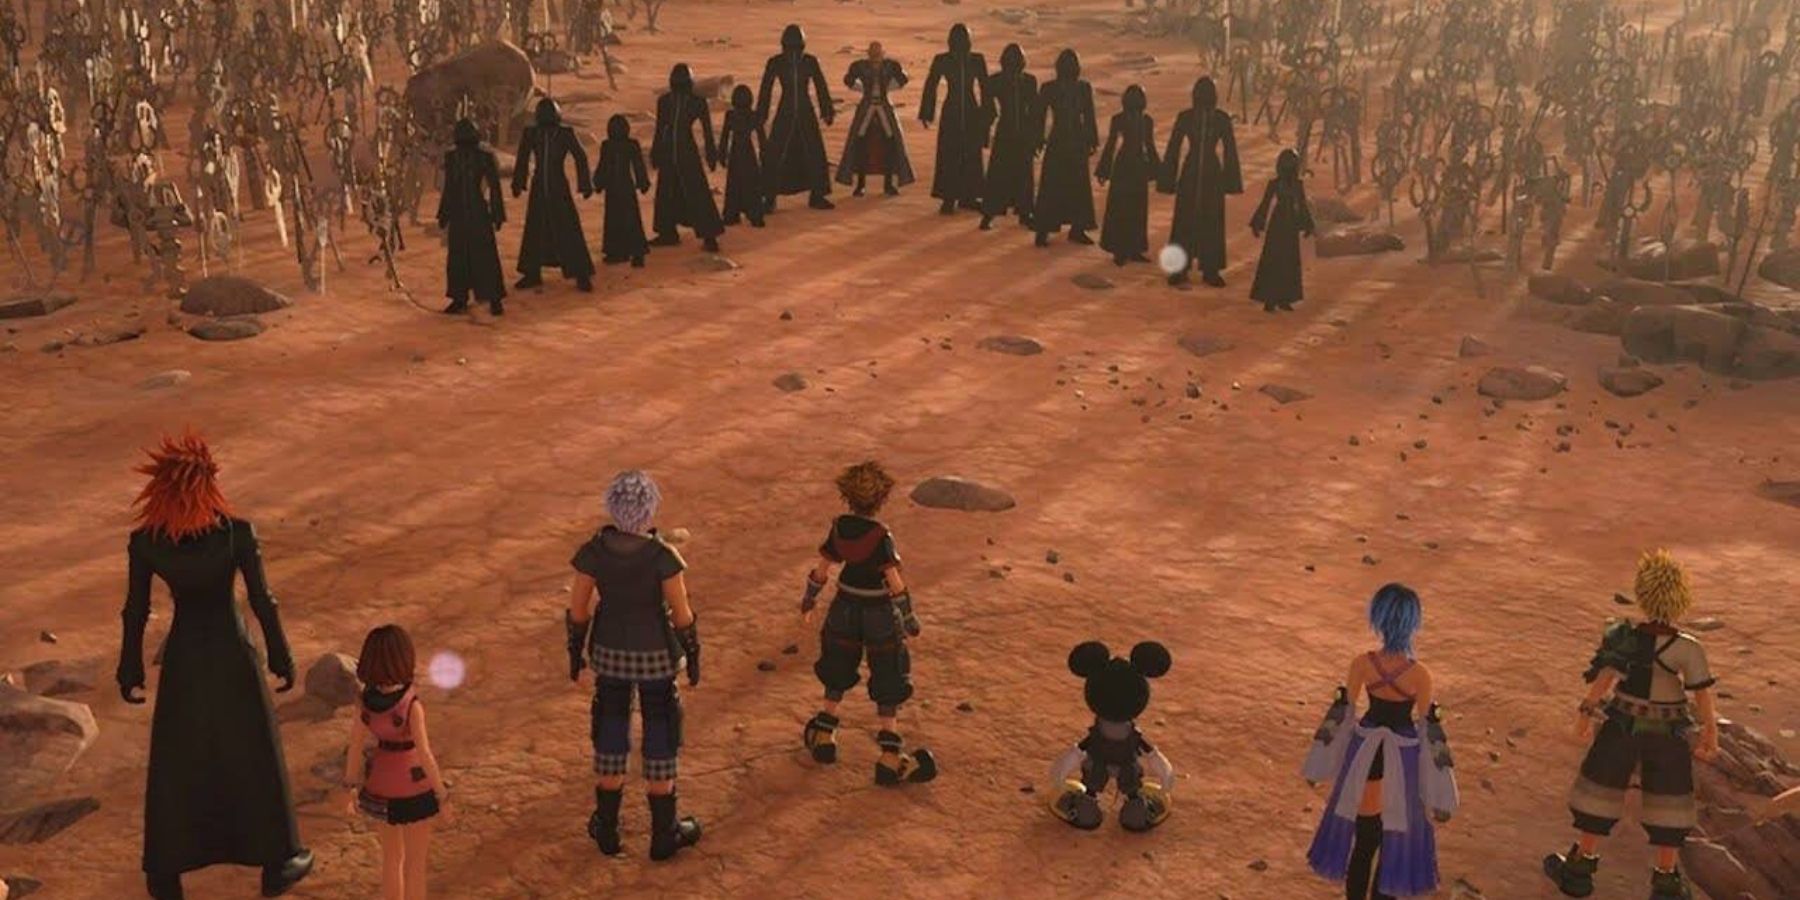 The 13 Darknesses face the 7 Lights in Kingdom Hearts 3